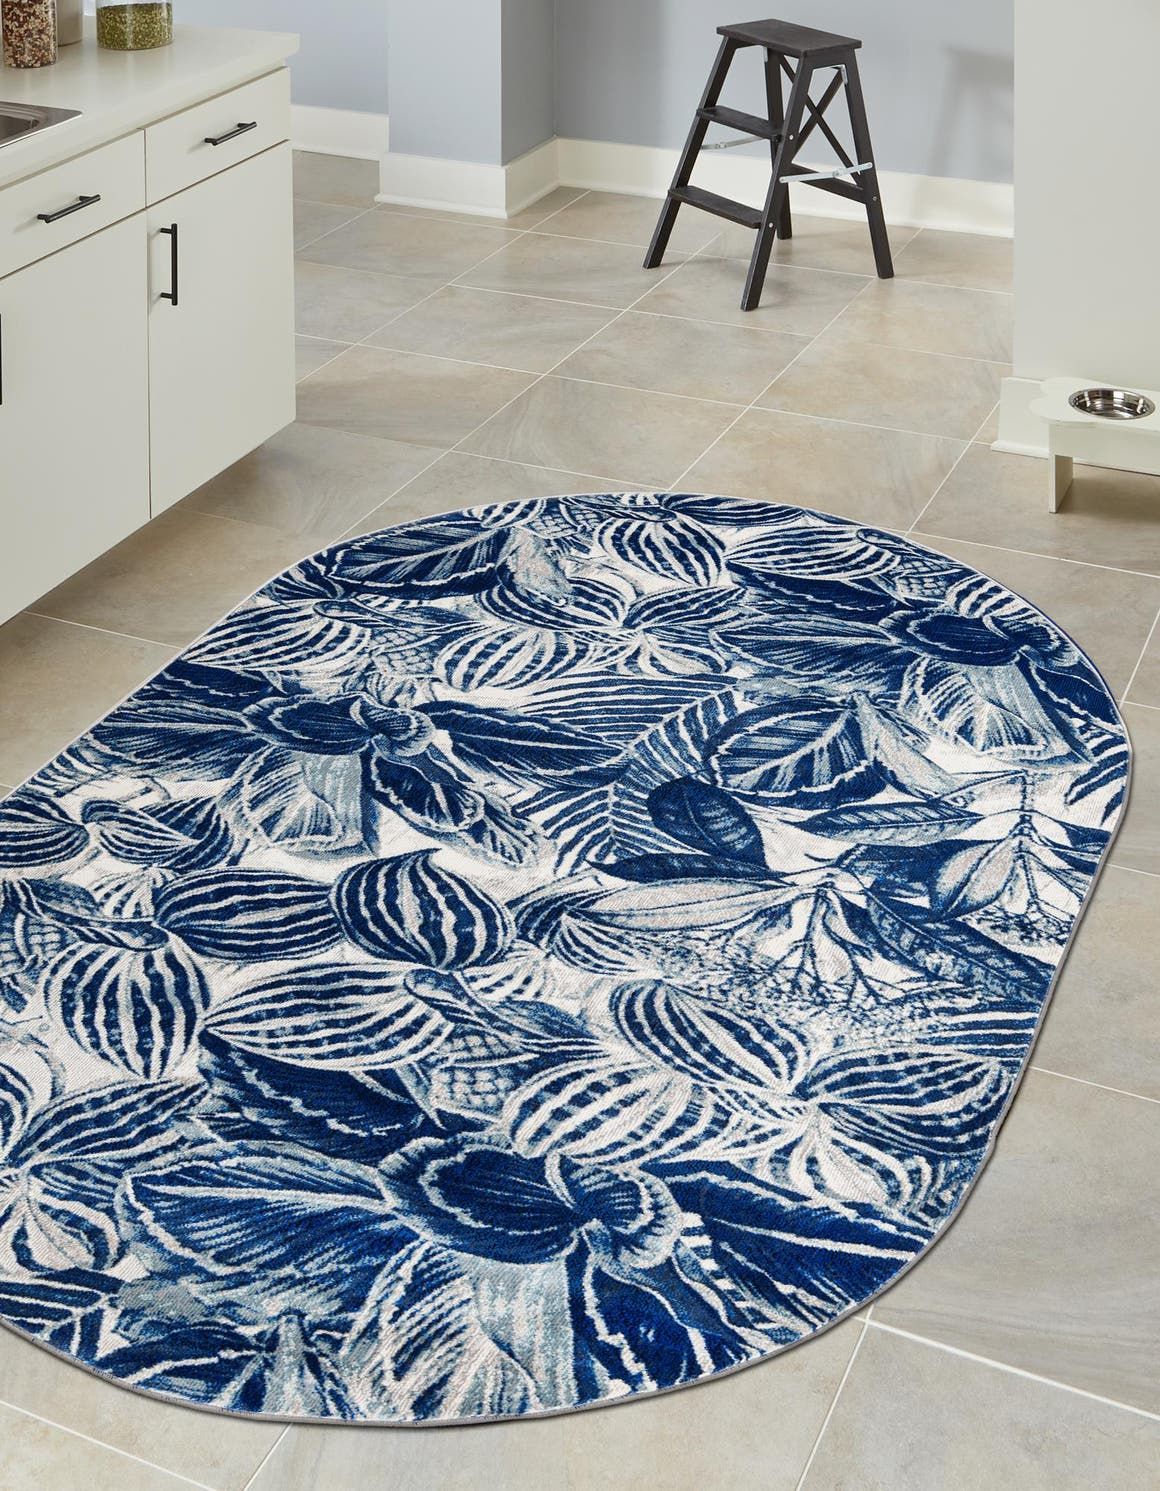 Unique Loom Ocho Blossom Rug Navy Blue/Ivory 4' 1" X 6' 1" Oval Botanical  Modern Perfect For Dining Room Bed Room Kids Room Play Room – Walmart Intended For Ivory Blossom Oval Rugs (View 9 of 15)